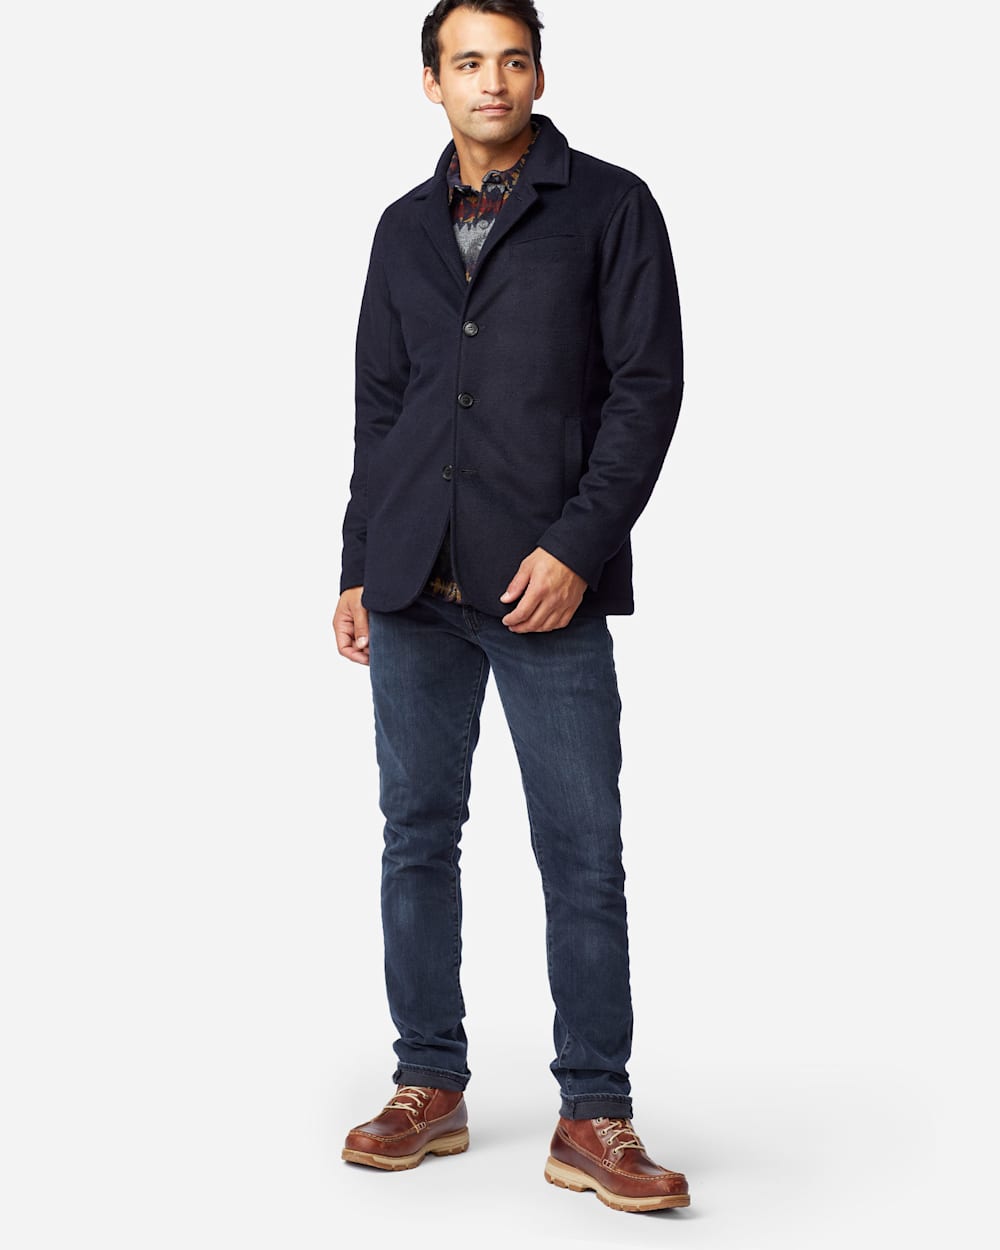 ALTERNATE VIEW OF MEN'S BRUNSWICK INSULATED JACKET IN NAVY image number 4